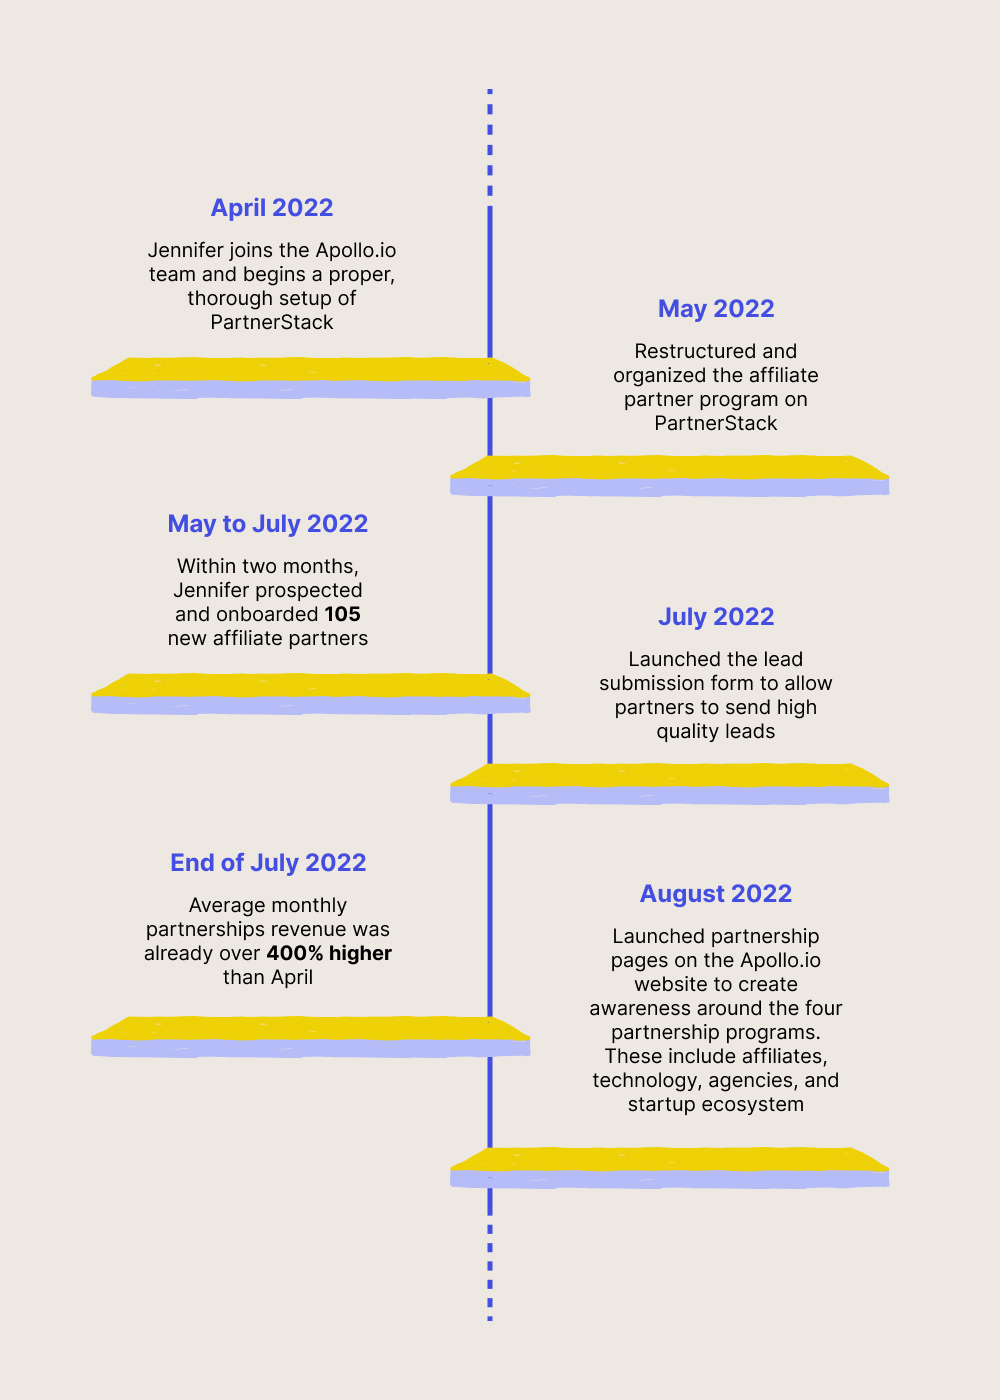 timeline of apollo's partnerships program growth from april 2022 to august 2022